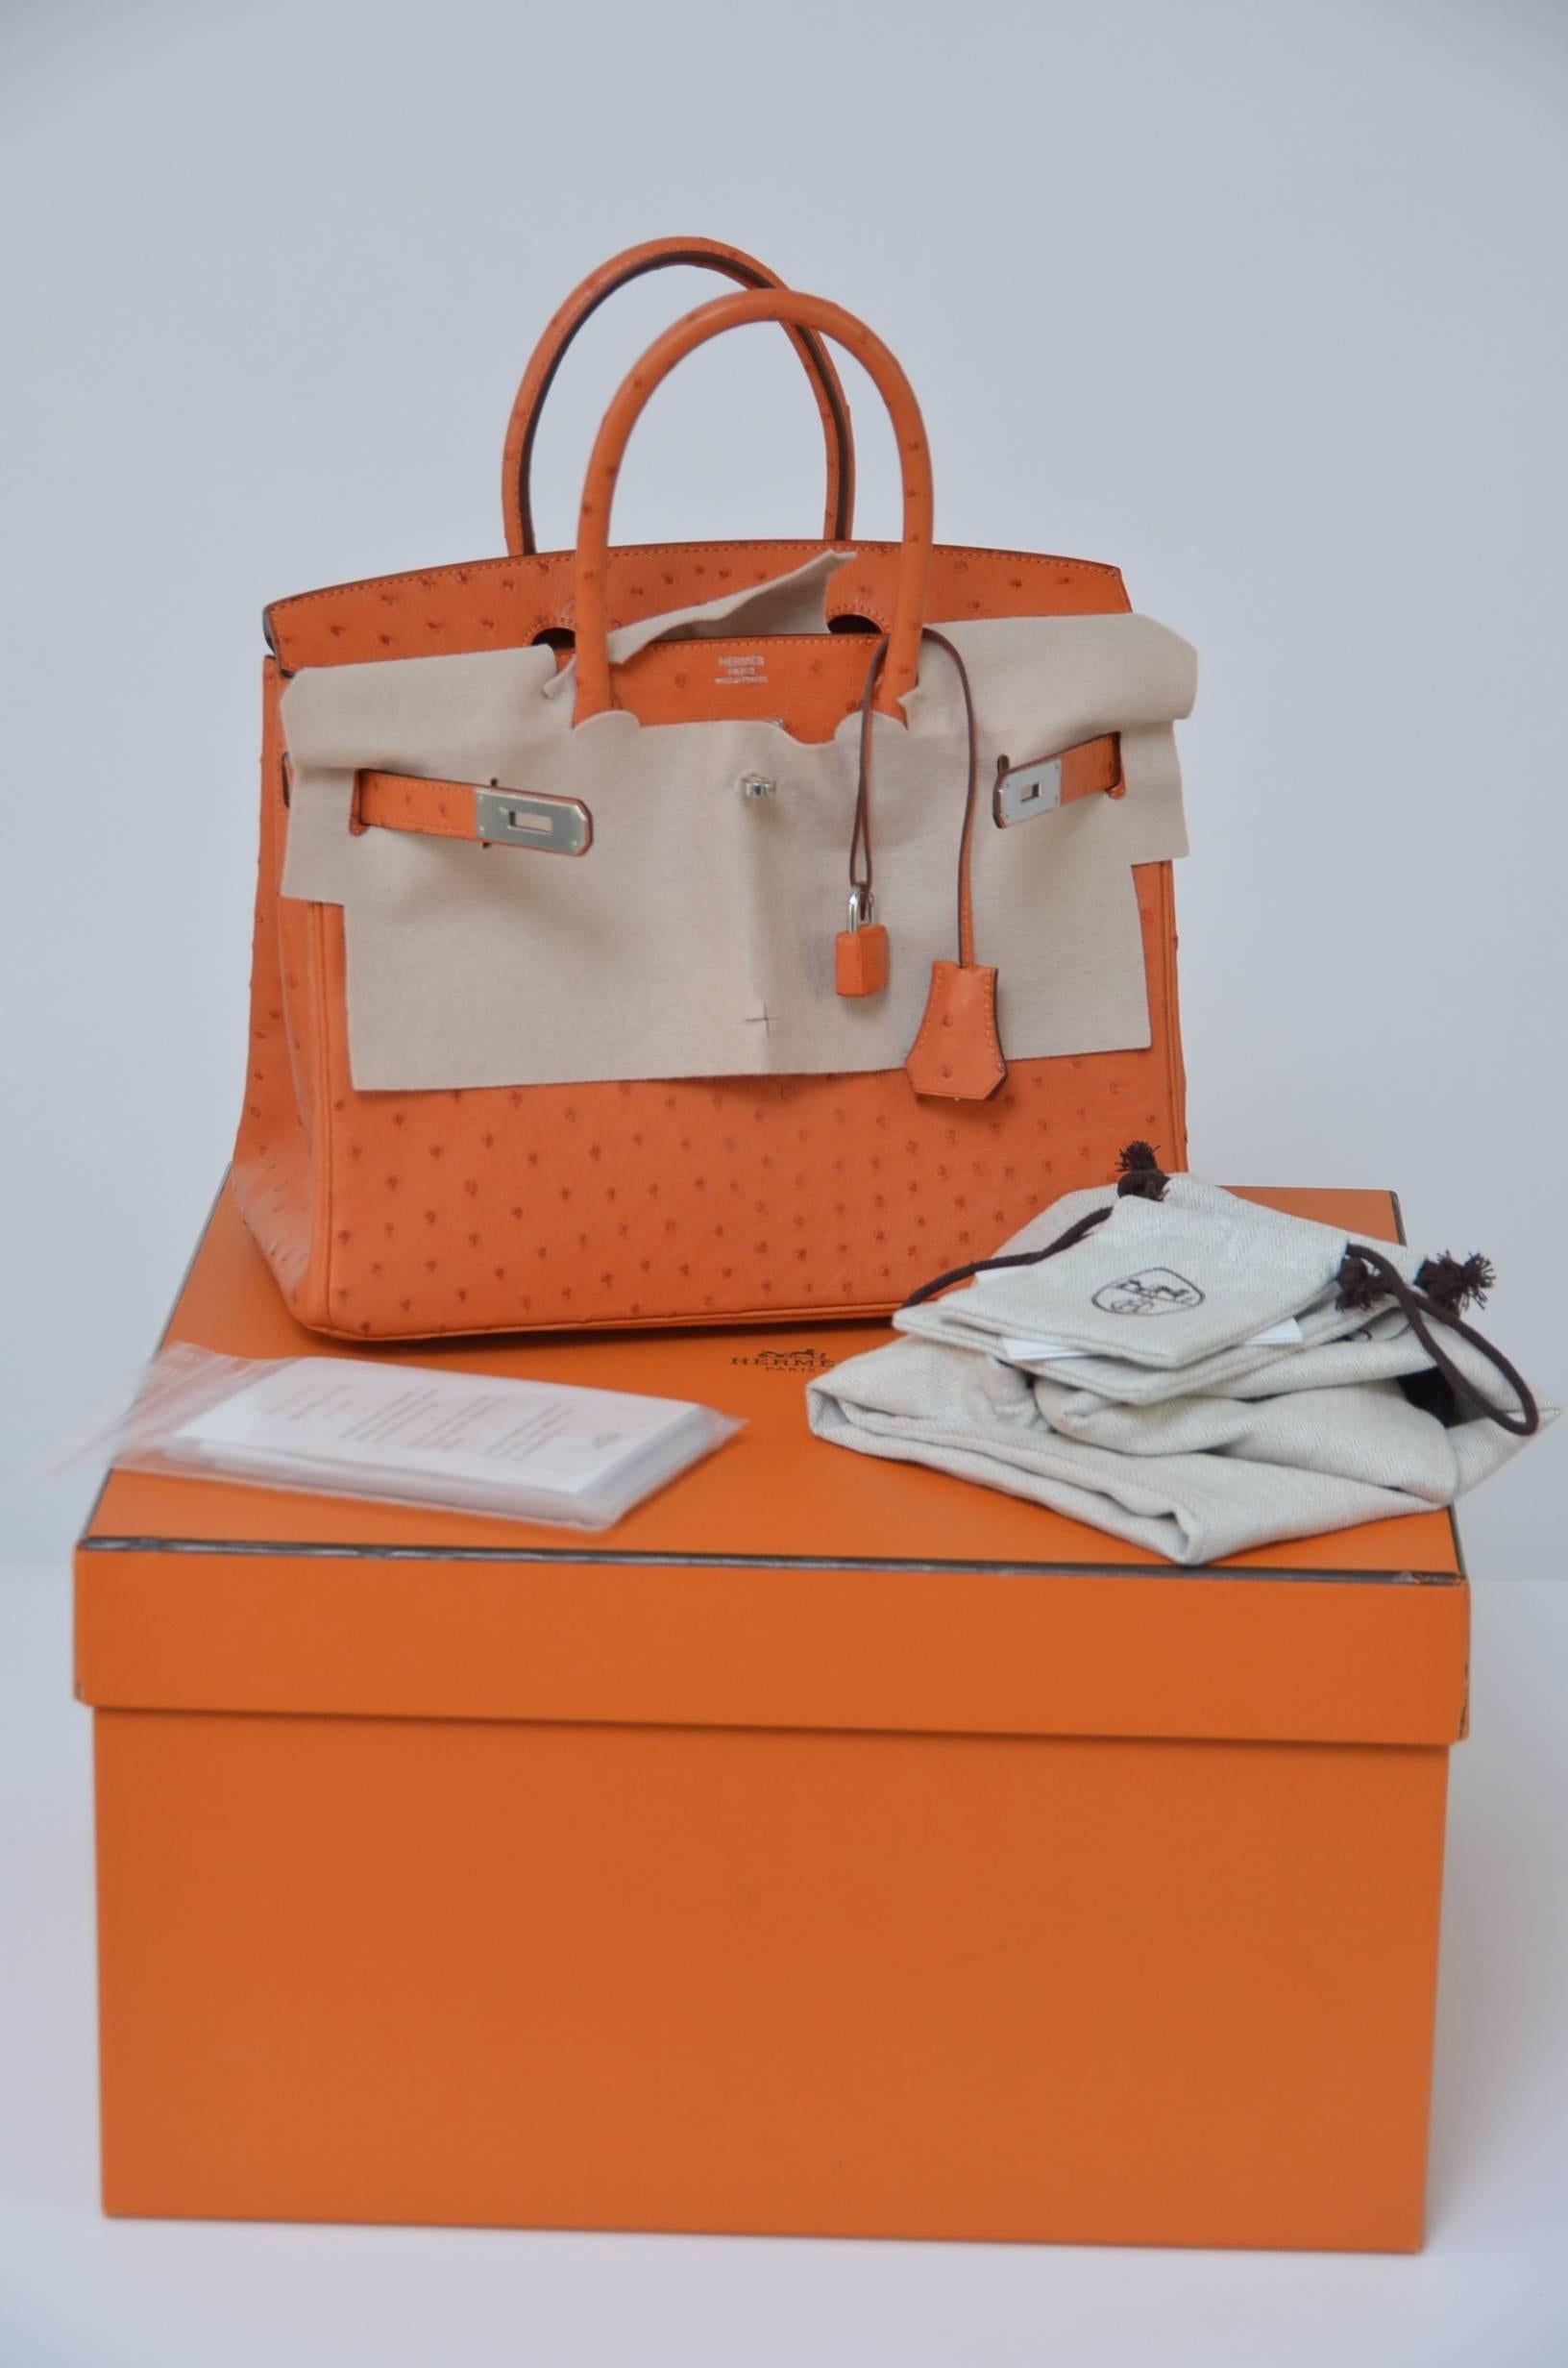 Hermes Tangerine 30cm in Ostrich with palladium hardware.
Tonal stitching, front toggle closure  and double rolled handles. The interior is lined in Tangerine chevre with one zip pocket with an Hermes engraved zipper pull and an open pocket on the